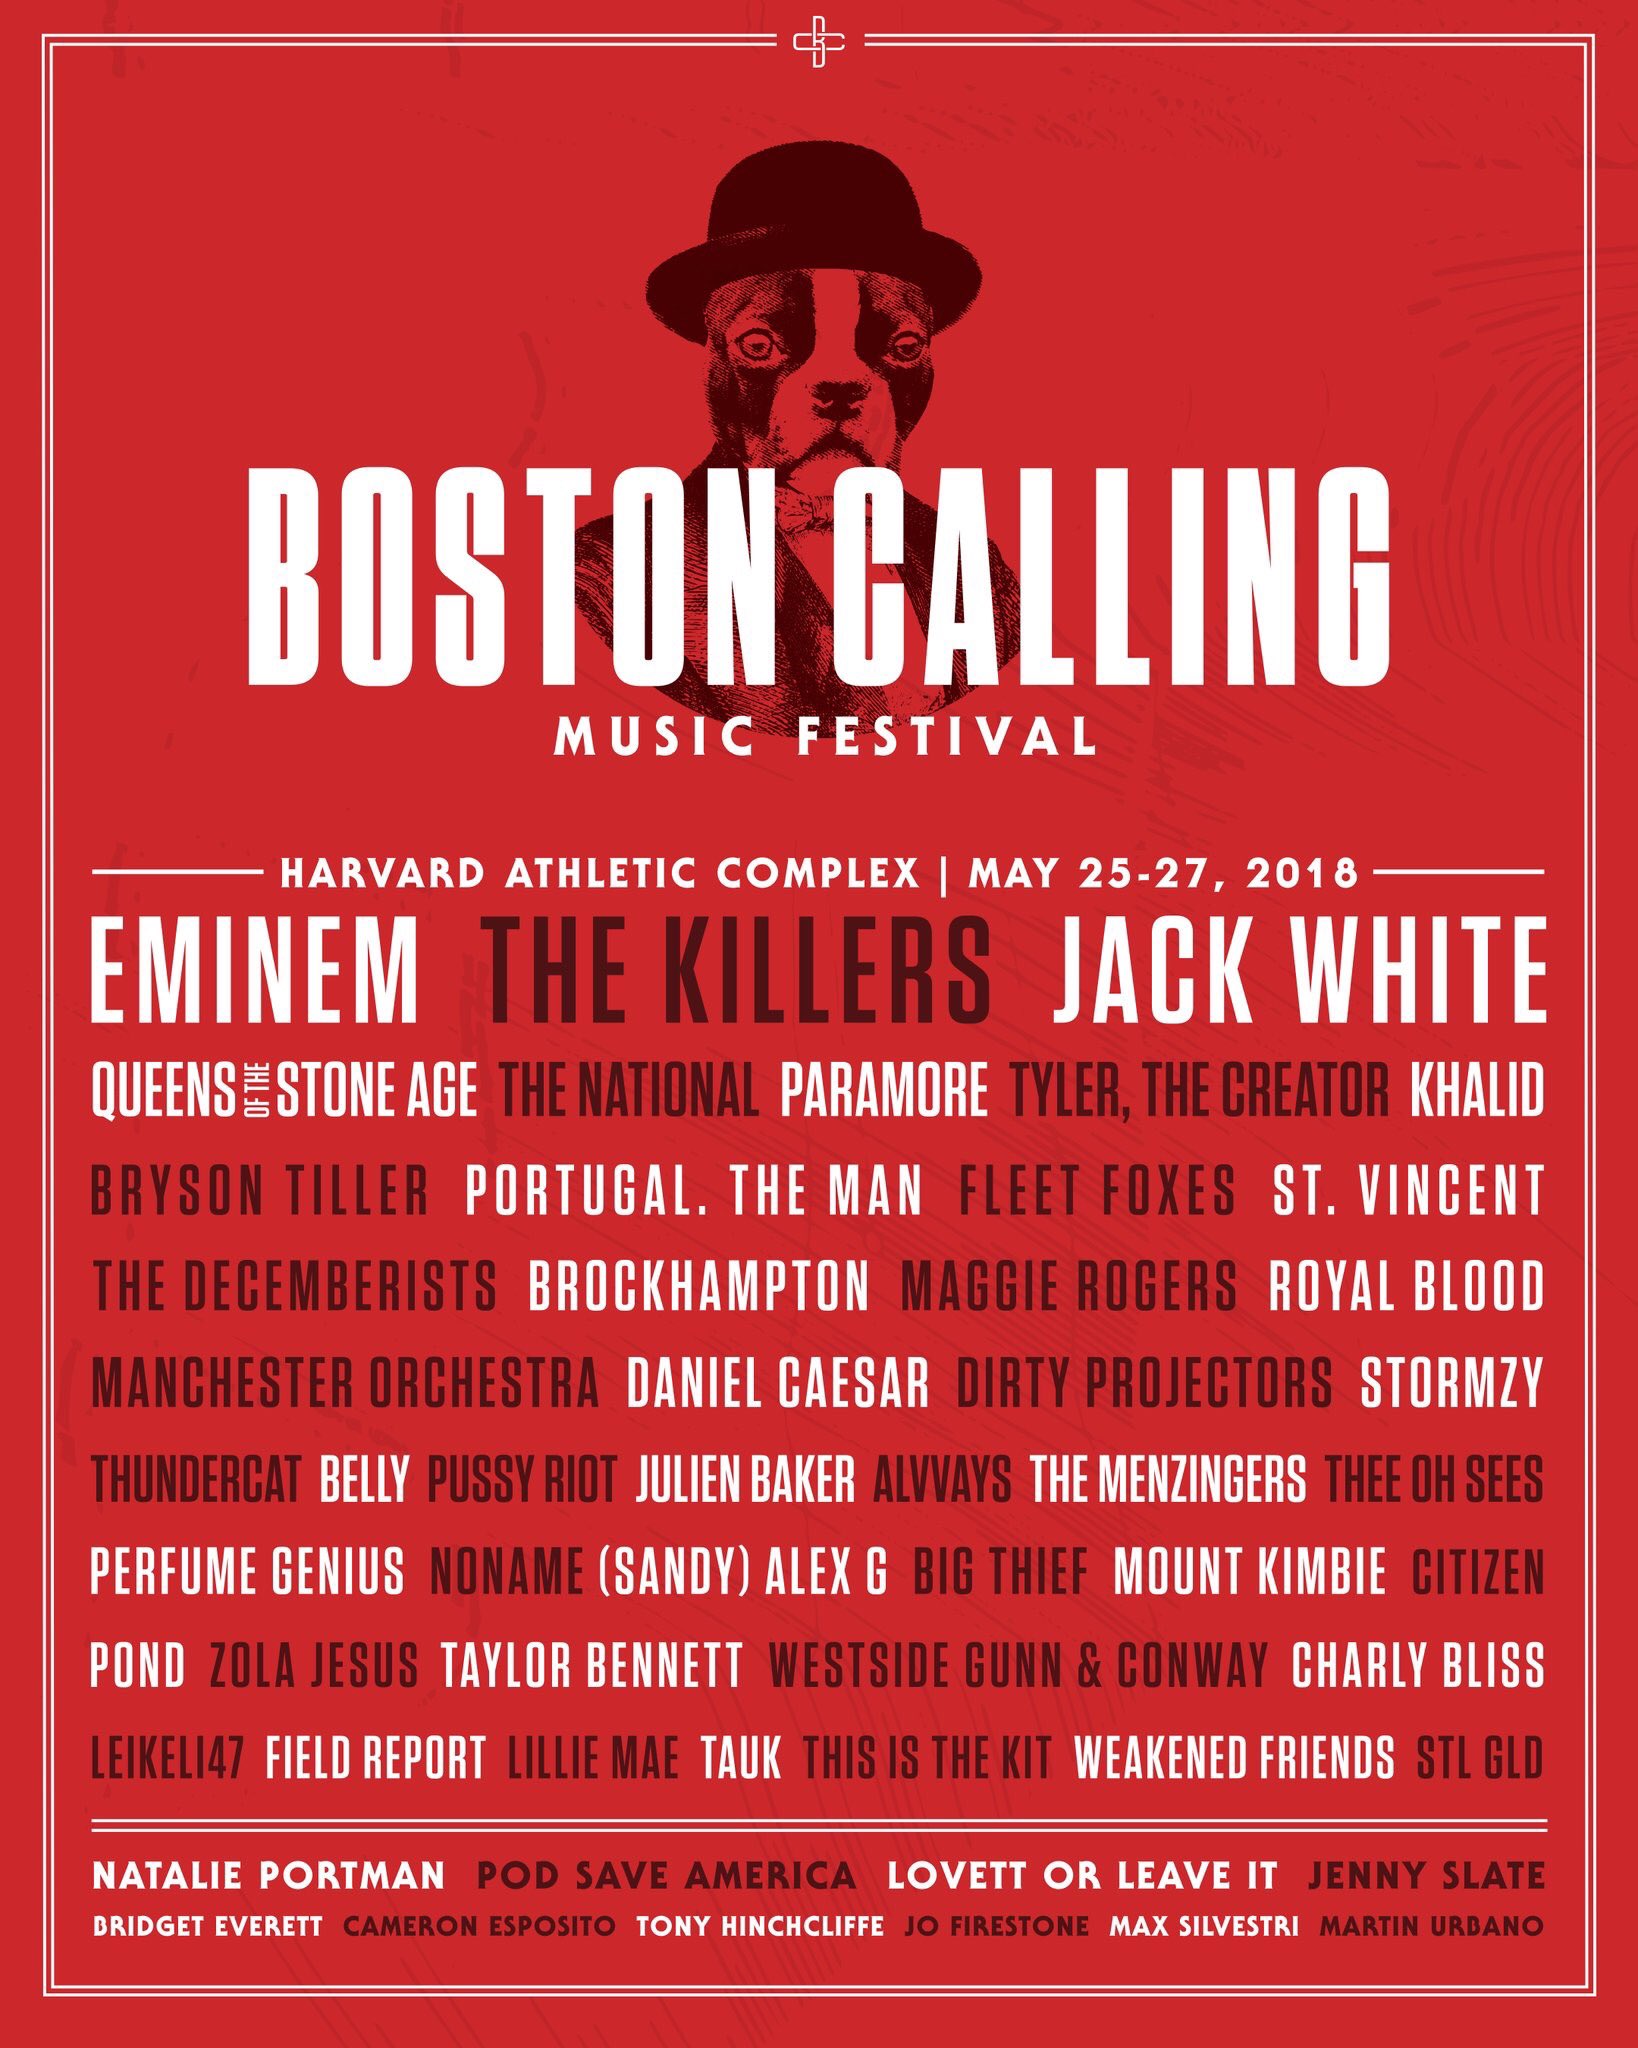 Boston Calling lineup for 2018. Photo by: Boston Calling